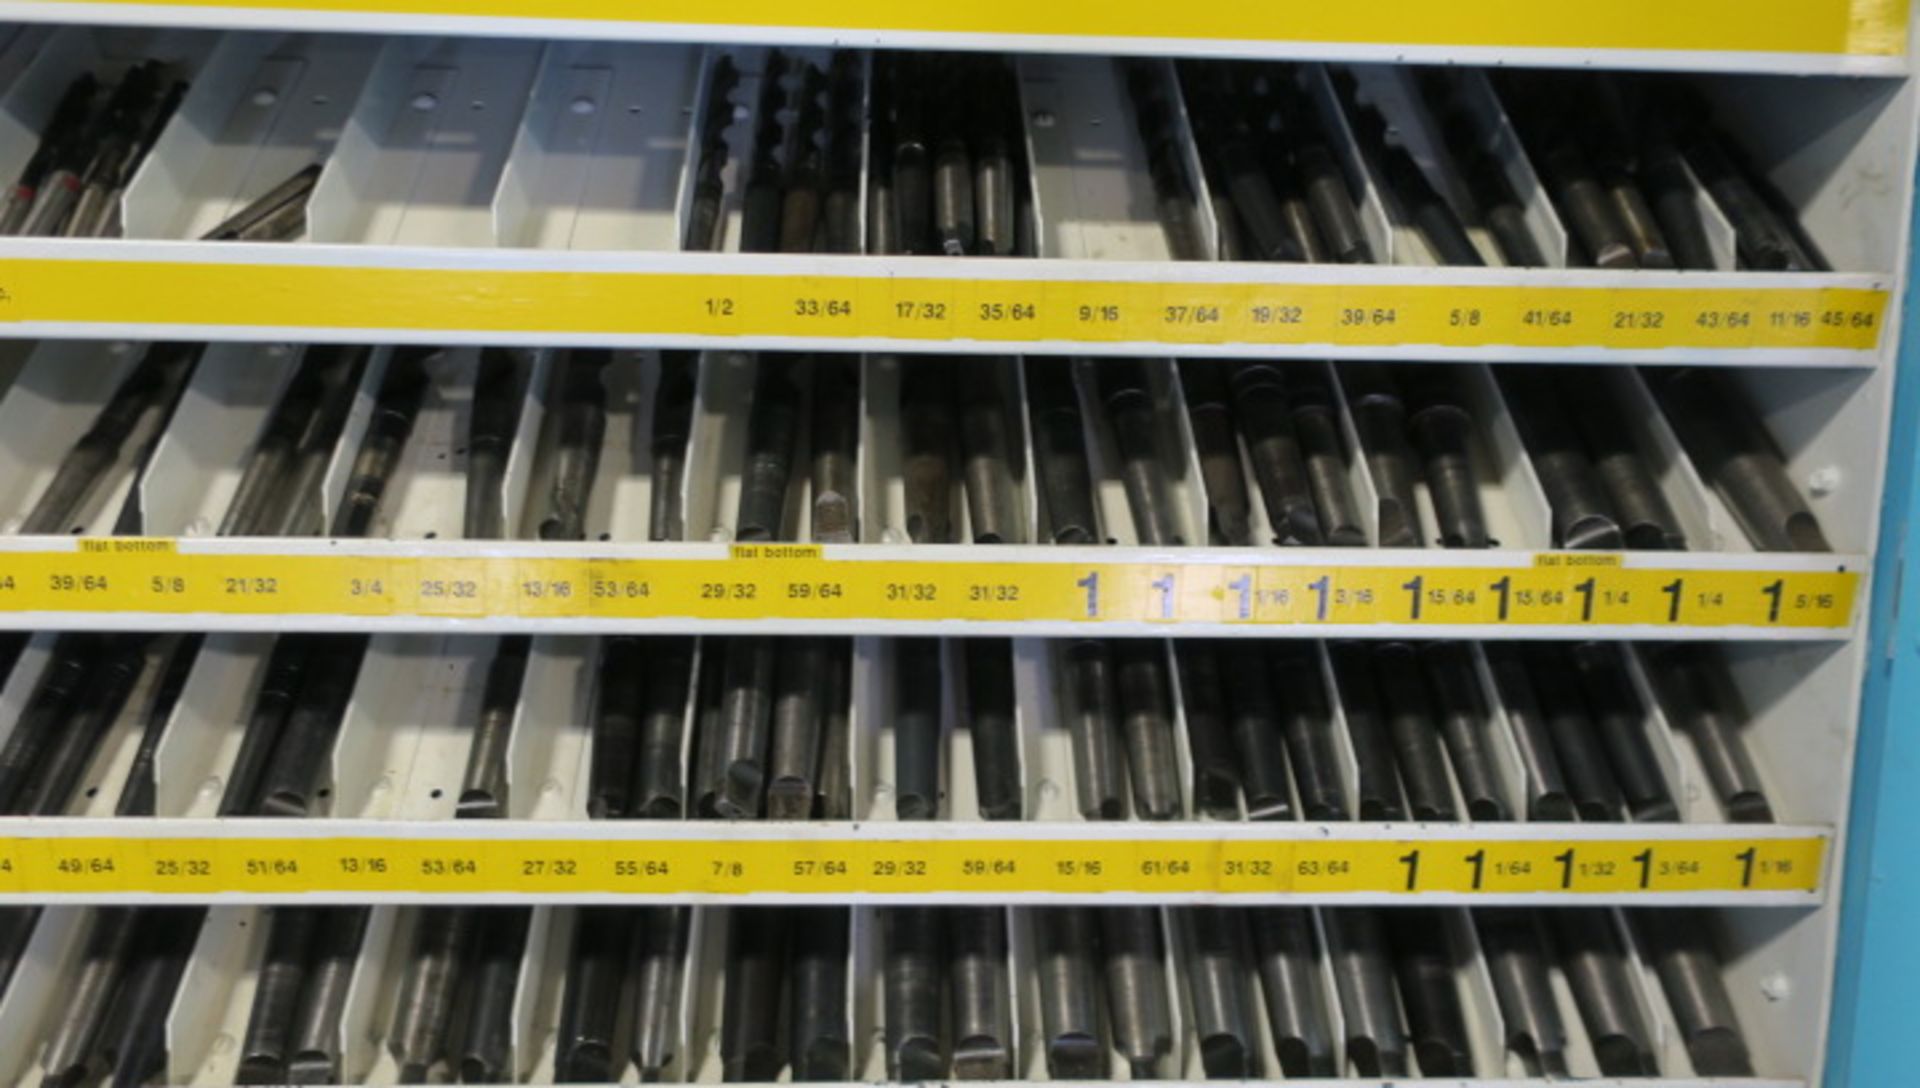 CABINET, w/large qty. of taper shank drills from 1/2" to 2-7/32" dia., in sorted trays - Image 2 of 4